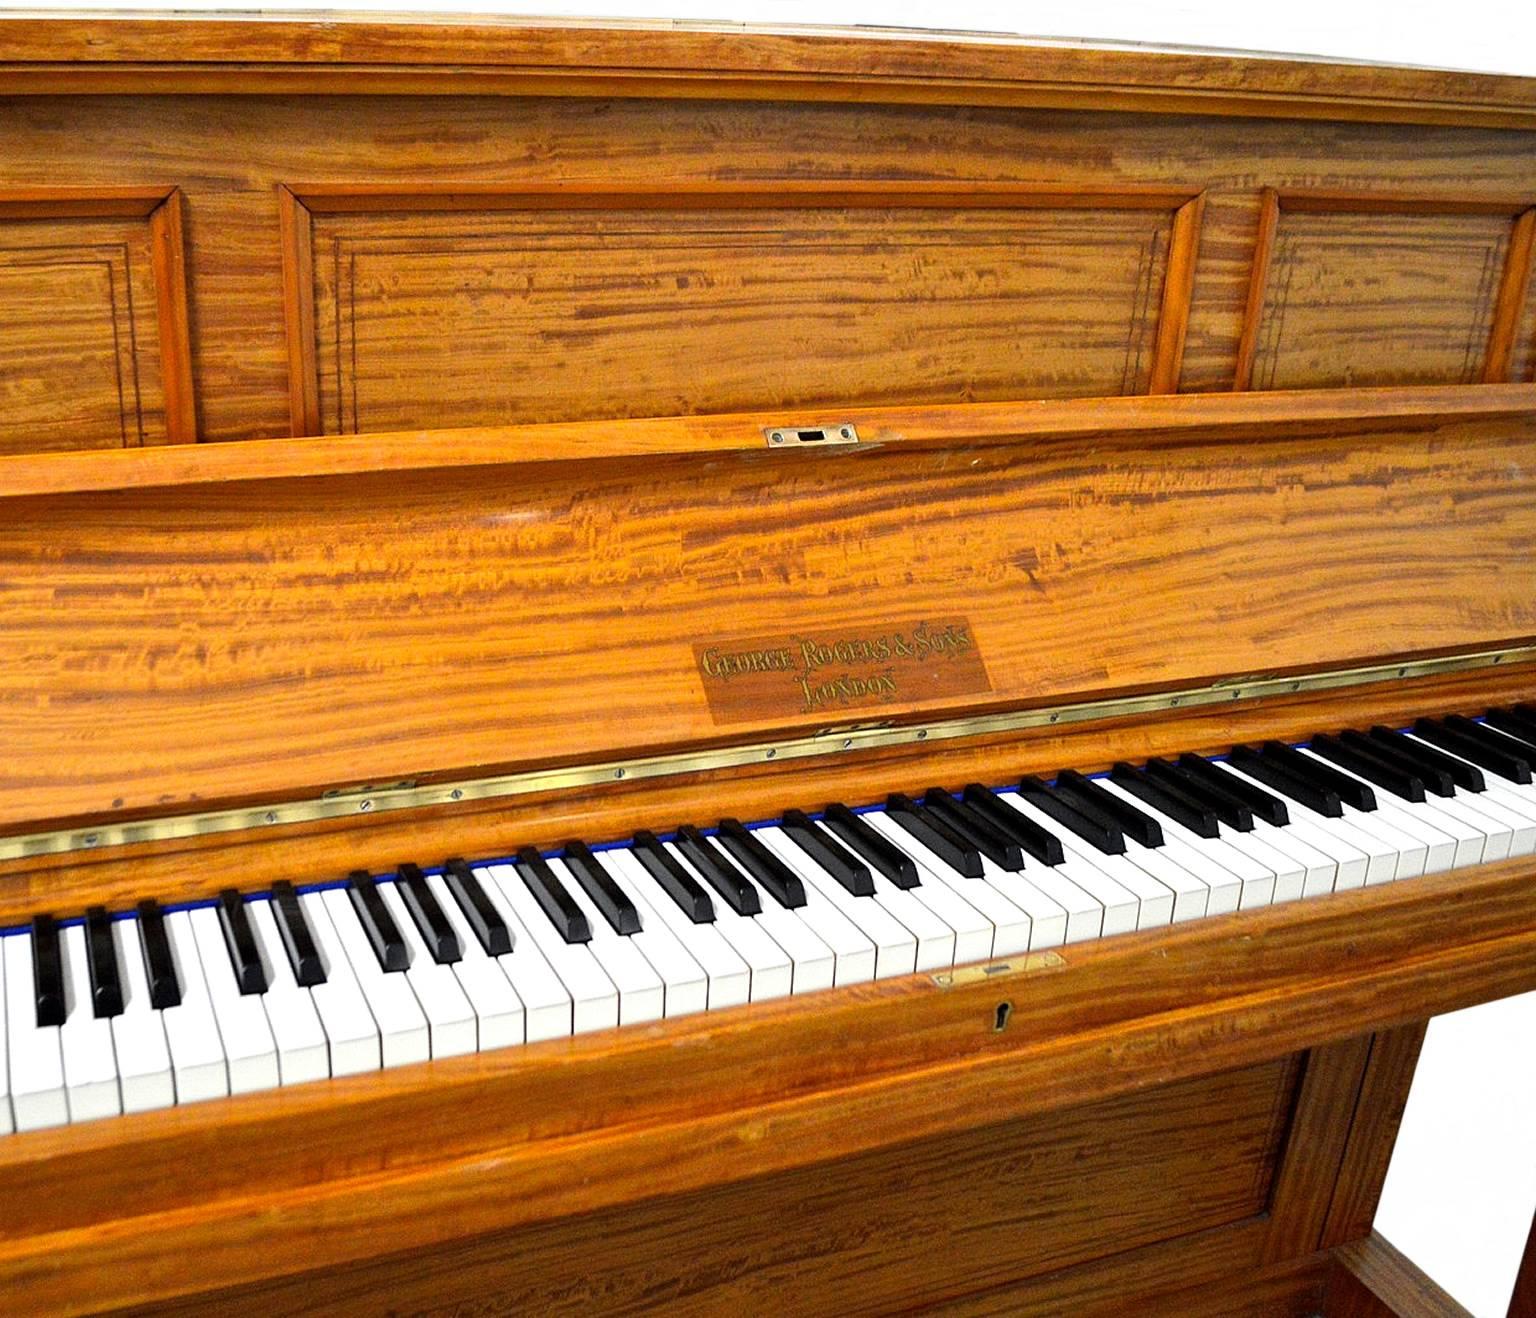 George Rogers made pianos of very high quality. The London based company started making pianos in 1843 and throughout the company's history it built up an outstanding reputation supplying leading concert halls, musical institutions and music lovers